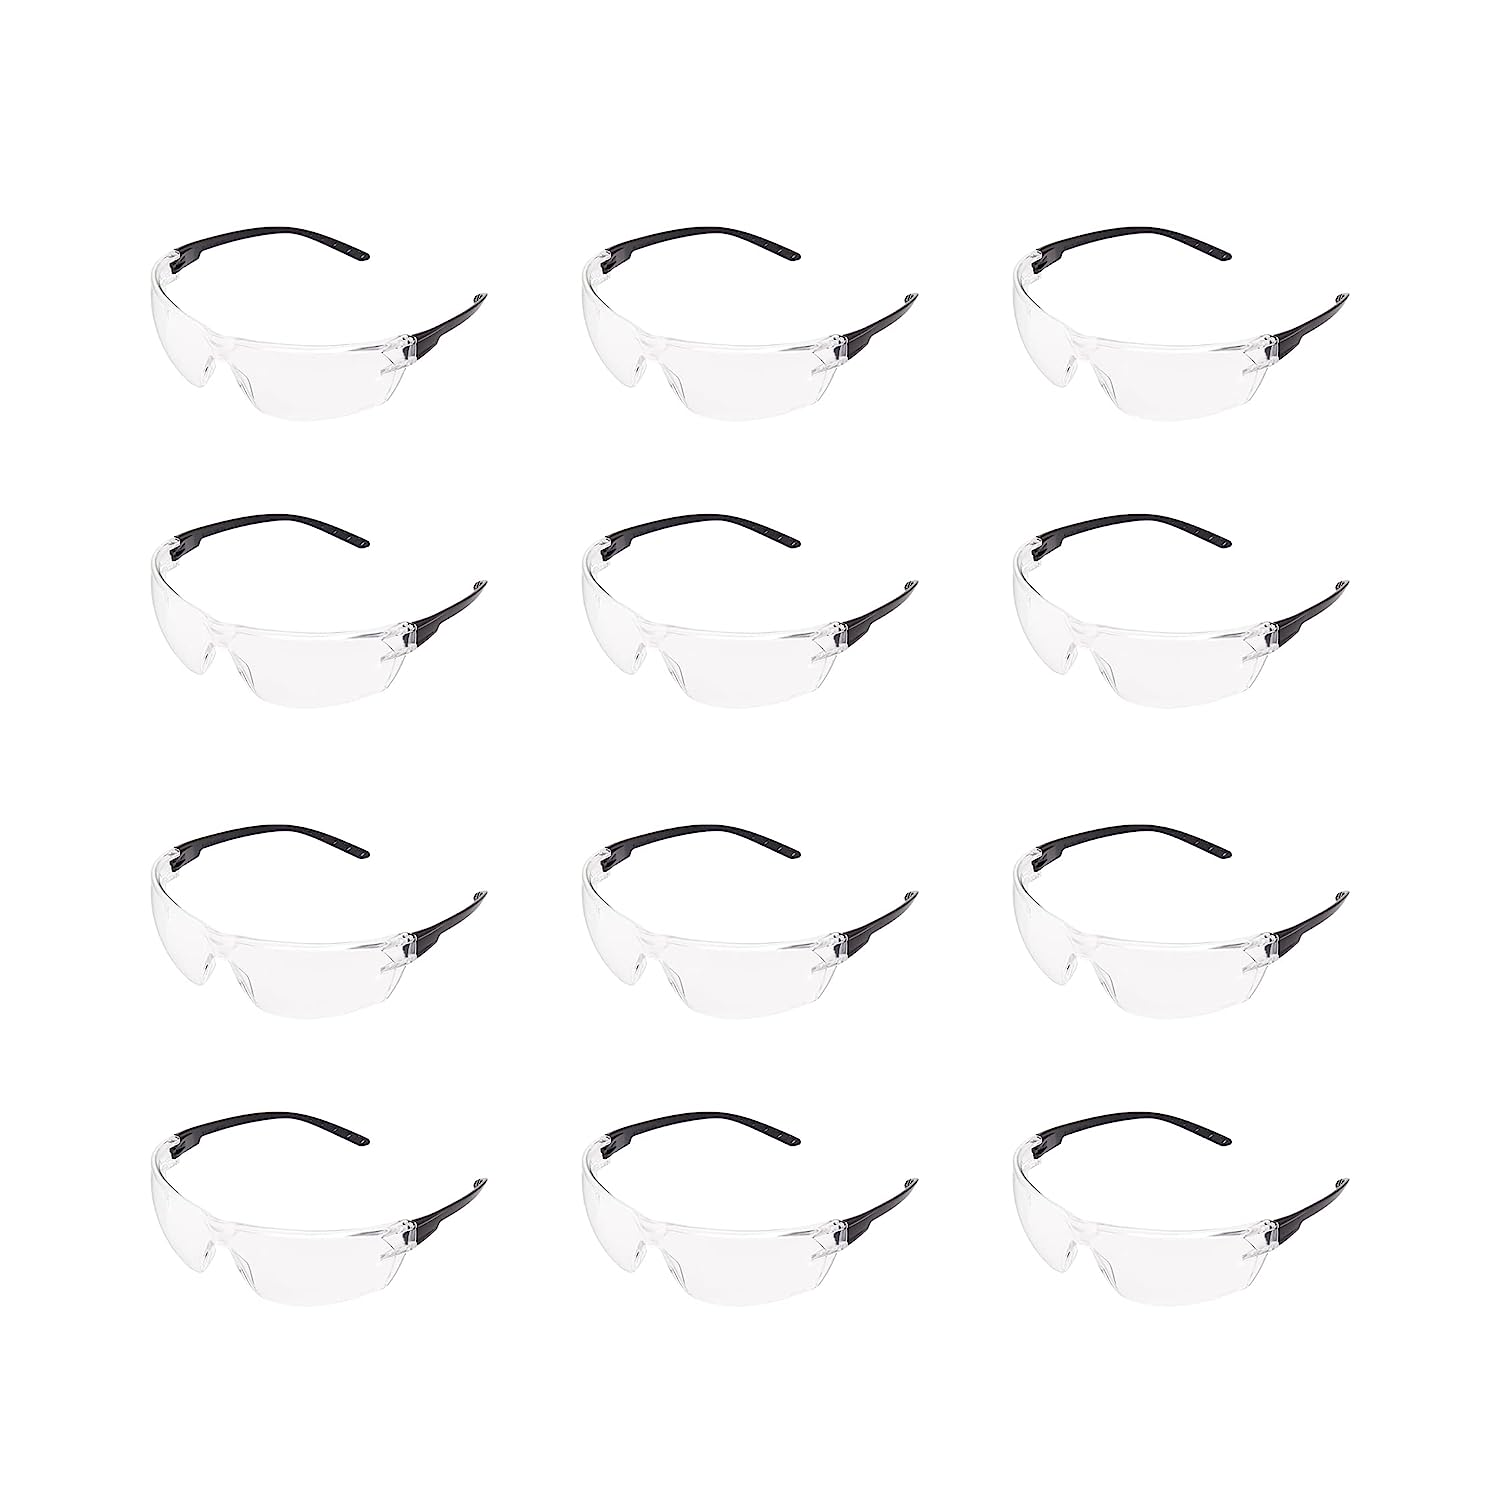 AmazonCommercial Safety Glasses (Clear/Black), Anti- [...]